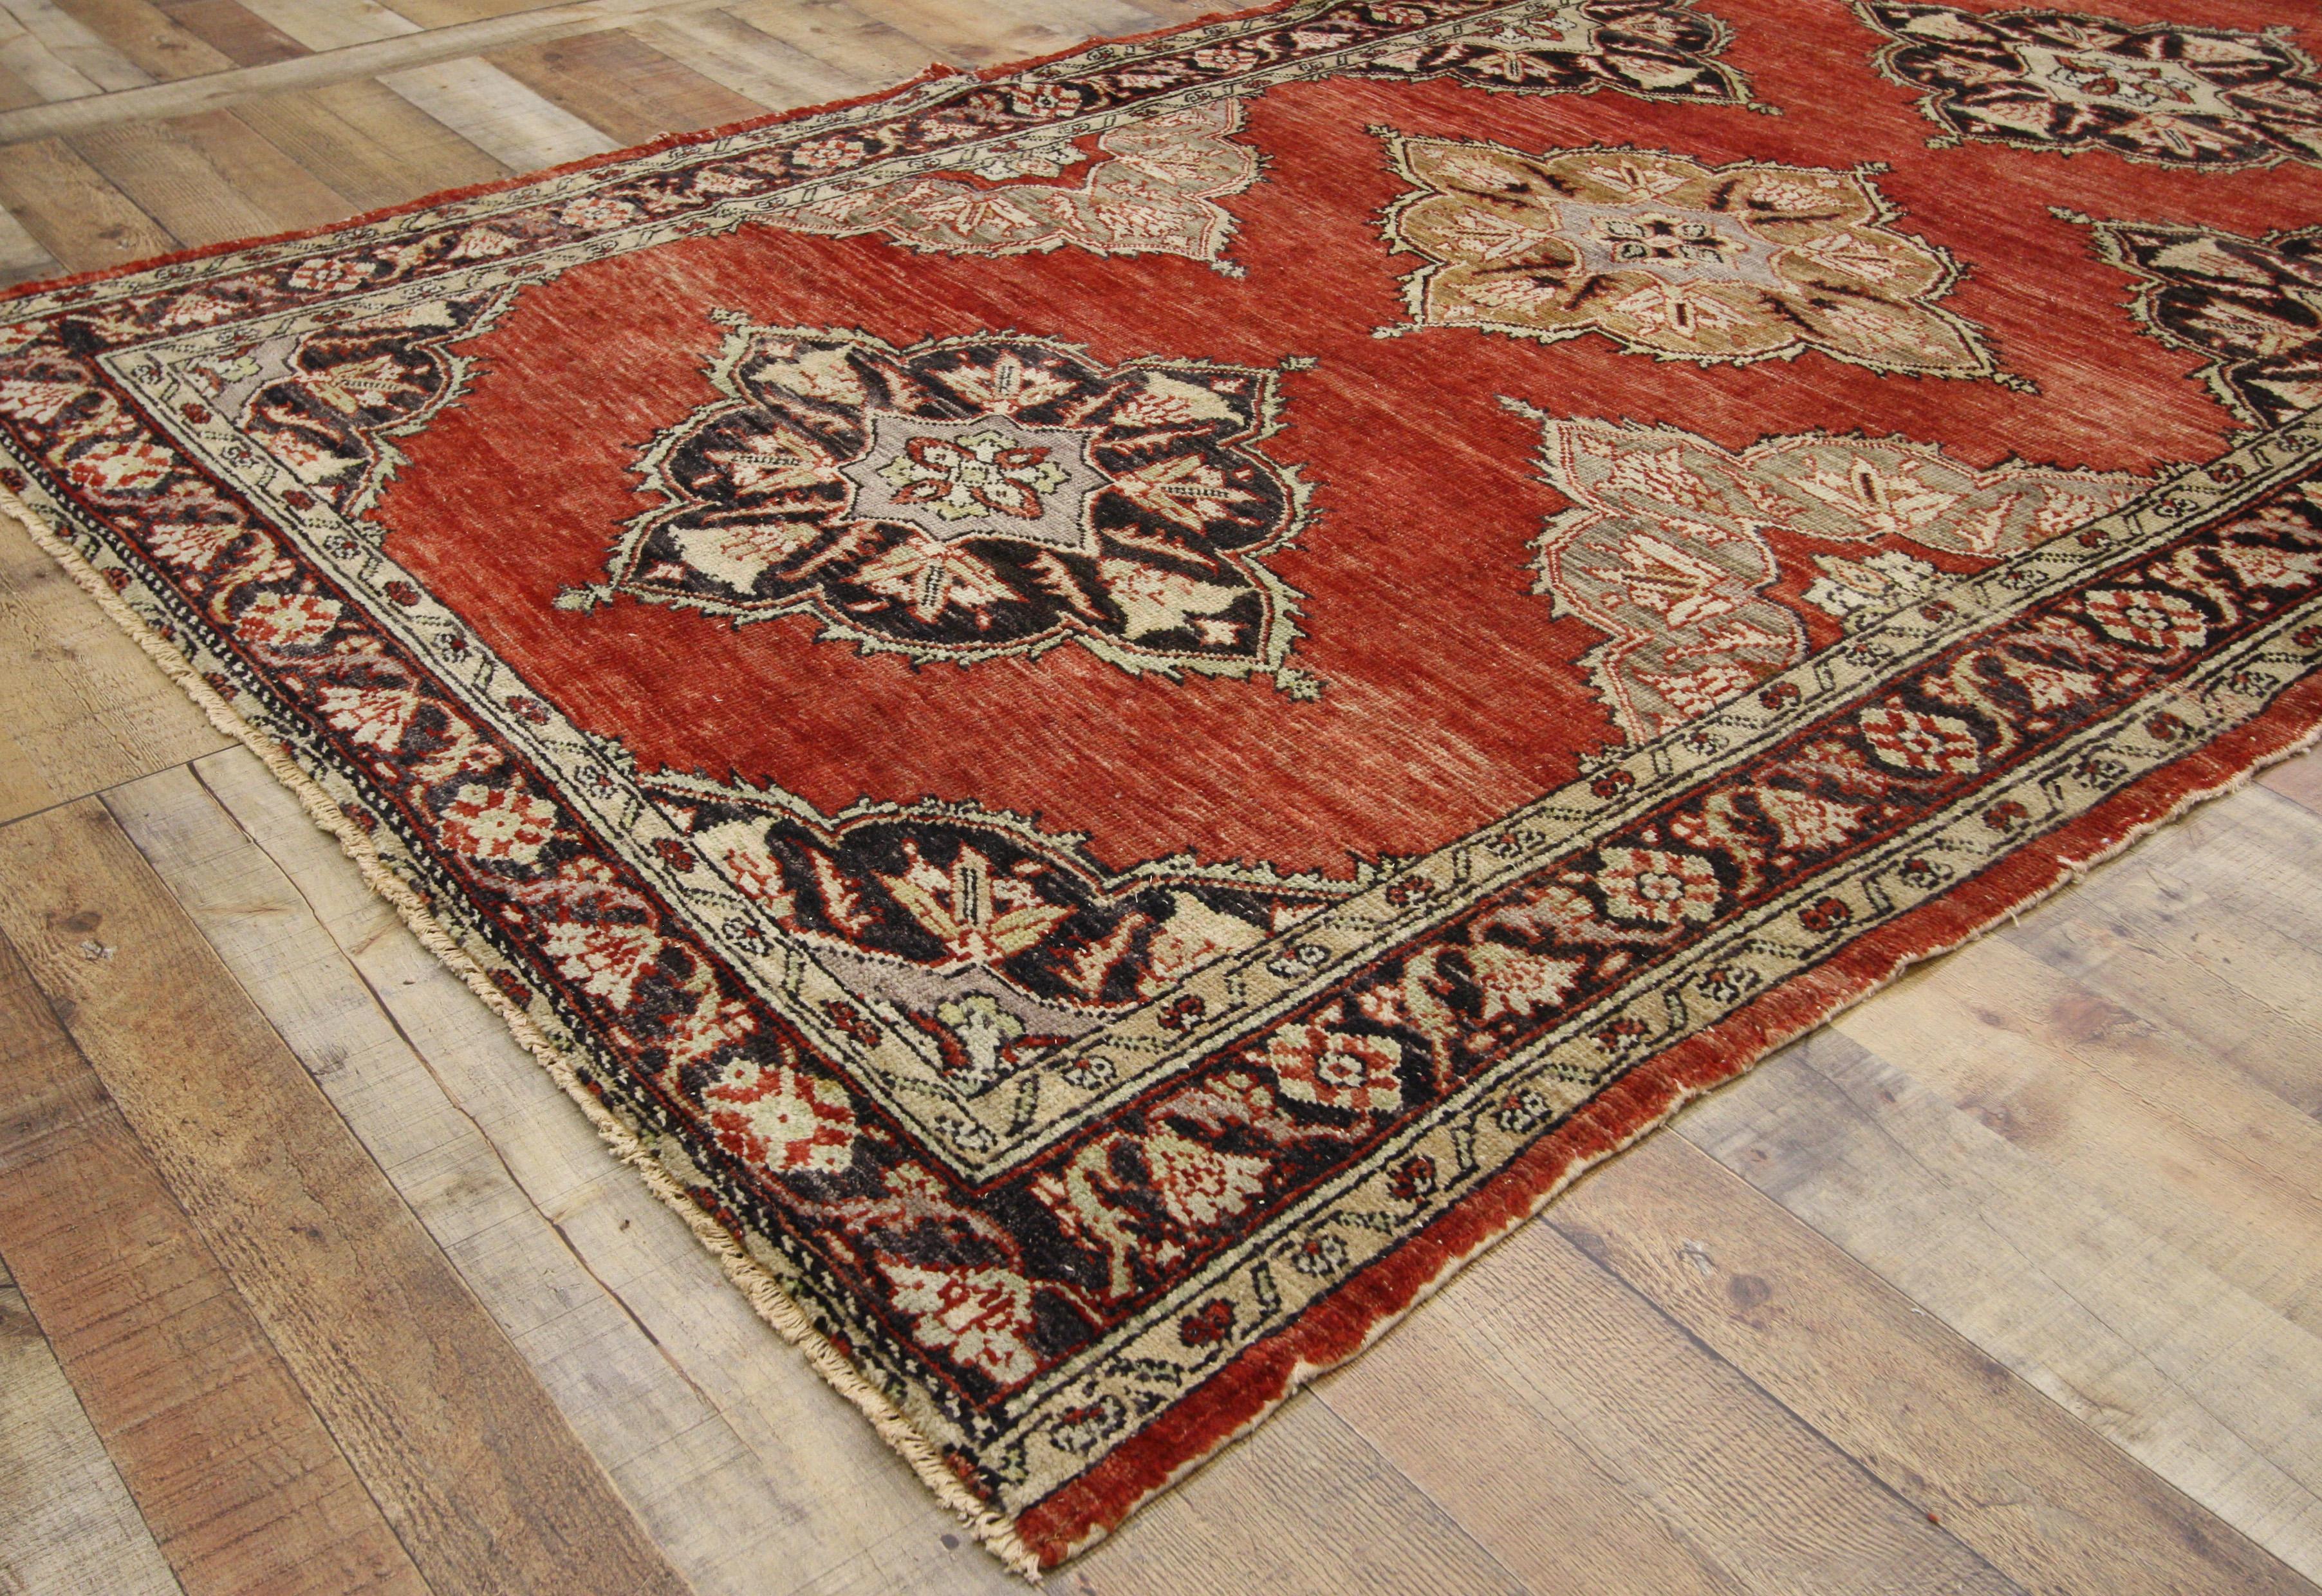 52388, vintage Turkish Oushak runner, wide hallway runner. This hand knotted wool vintage Turkish Oushak runner features five floral lobed diamond-shaped medallions spread across an abrashed red field. The petal-shaped lobes of the medallions